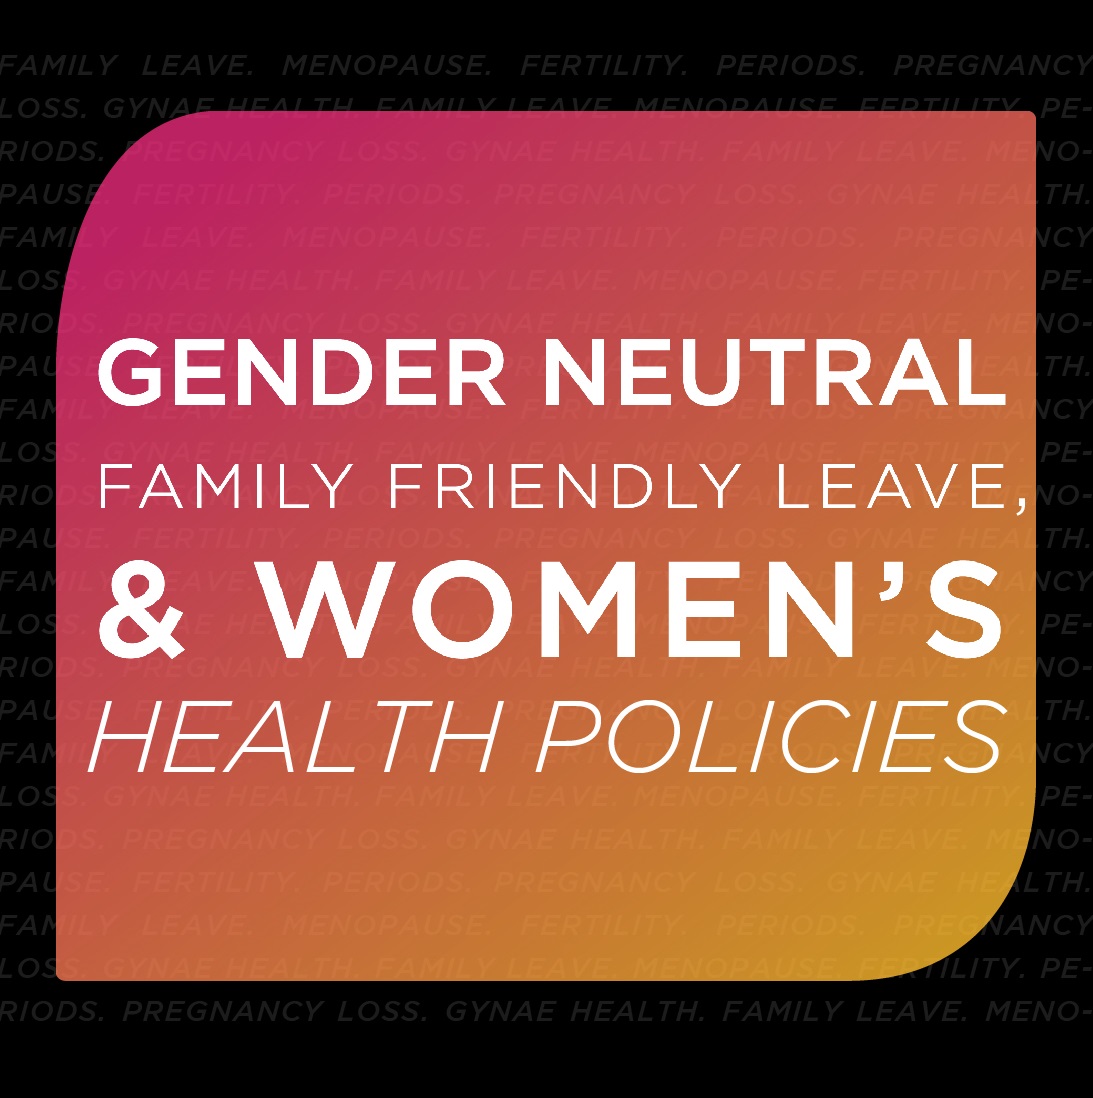 Image for Inclusive new policies to support women and families 